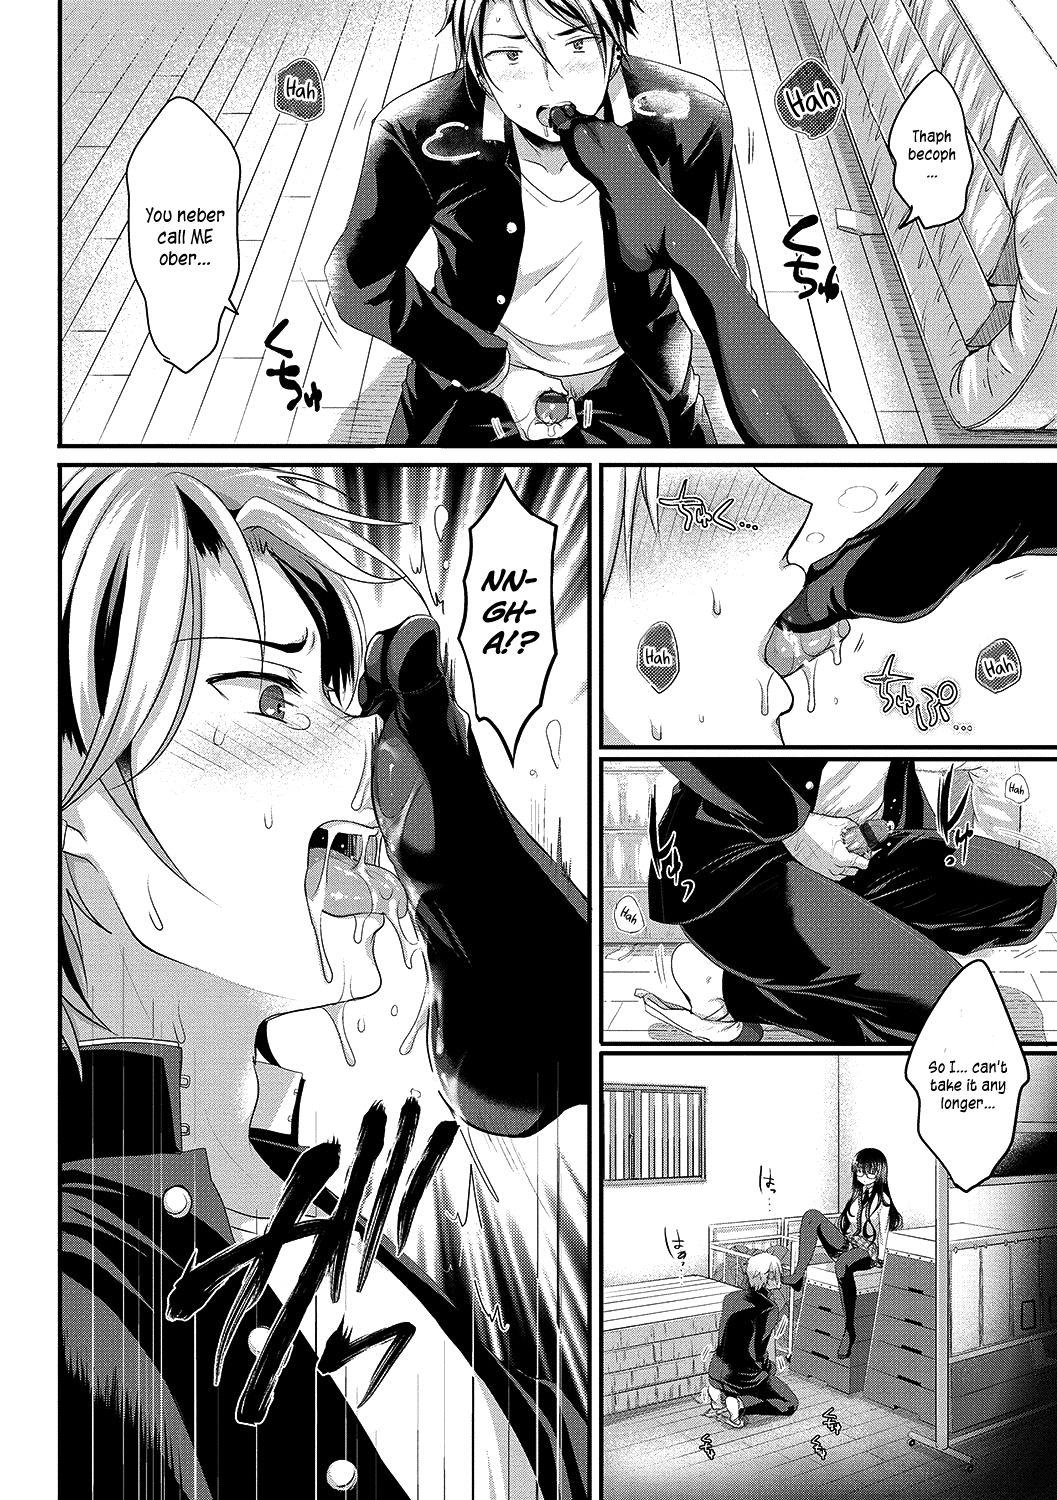 New Houkago Interest Group Sex - Page 4